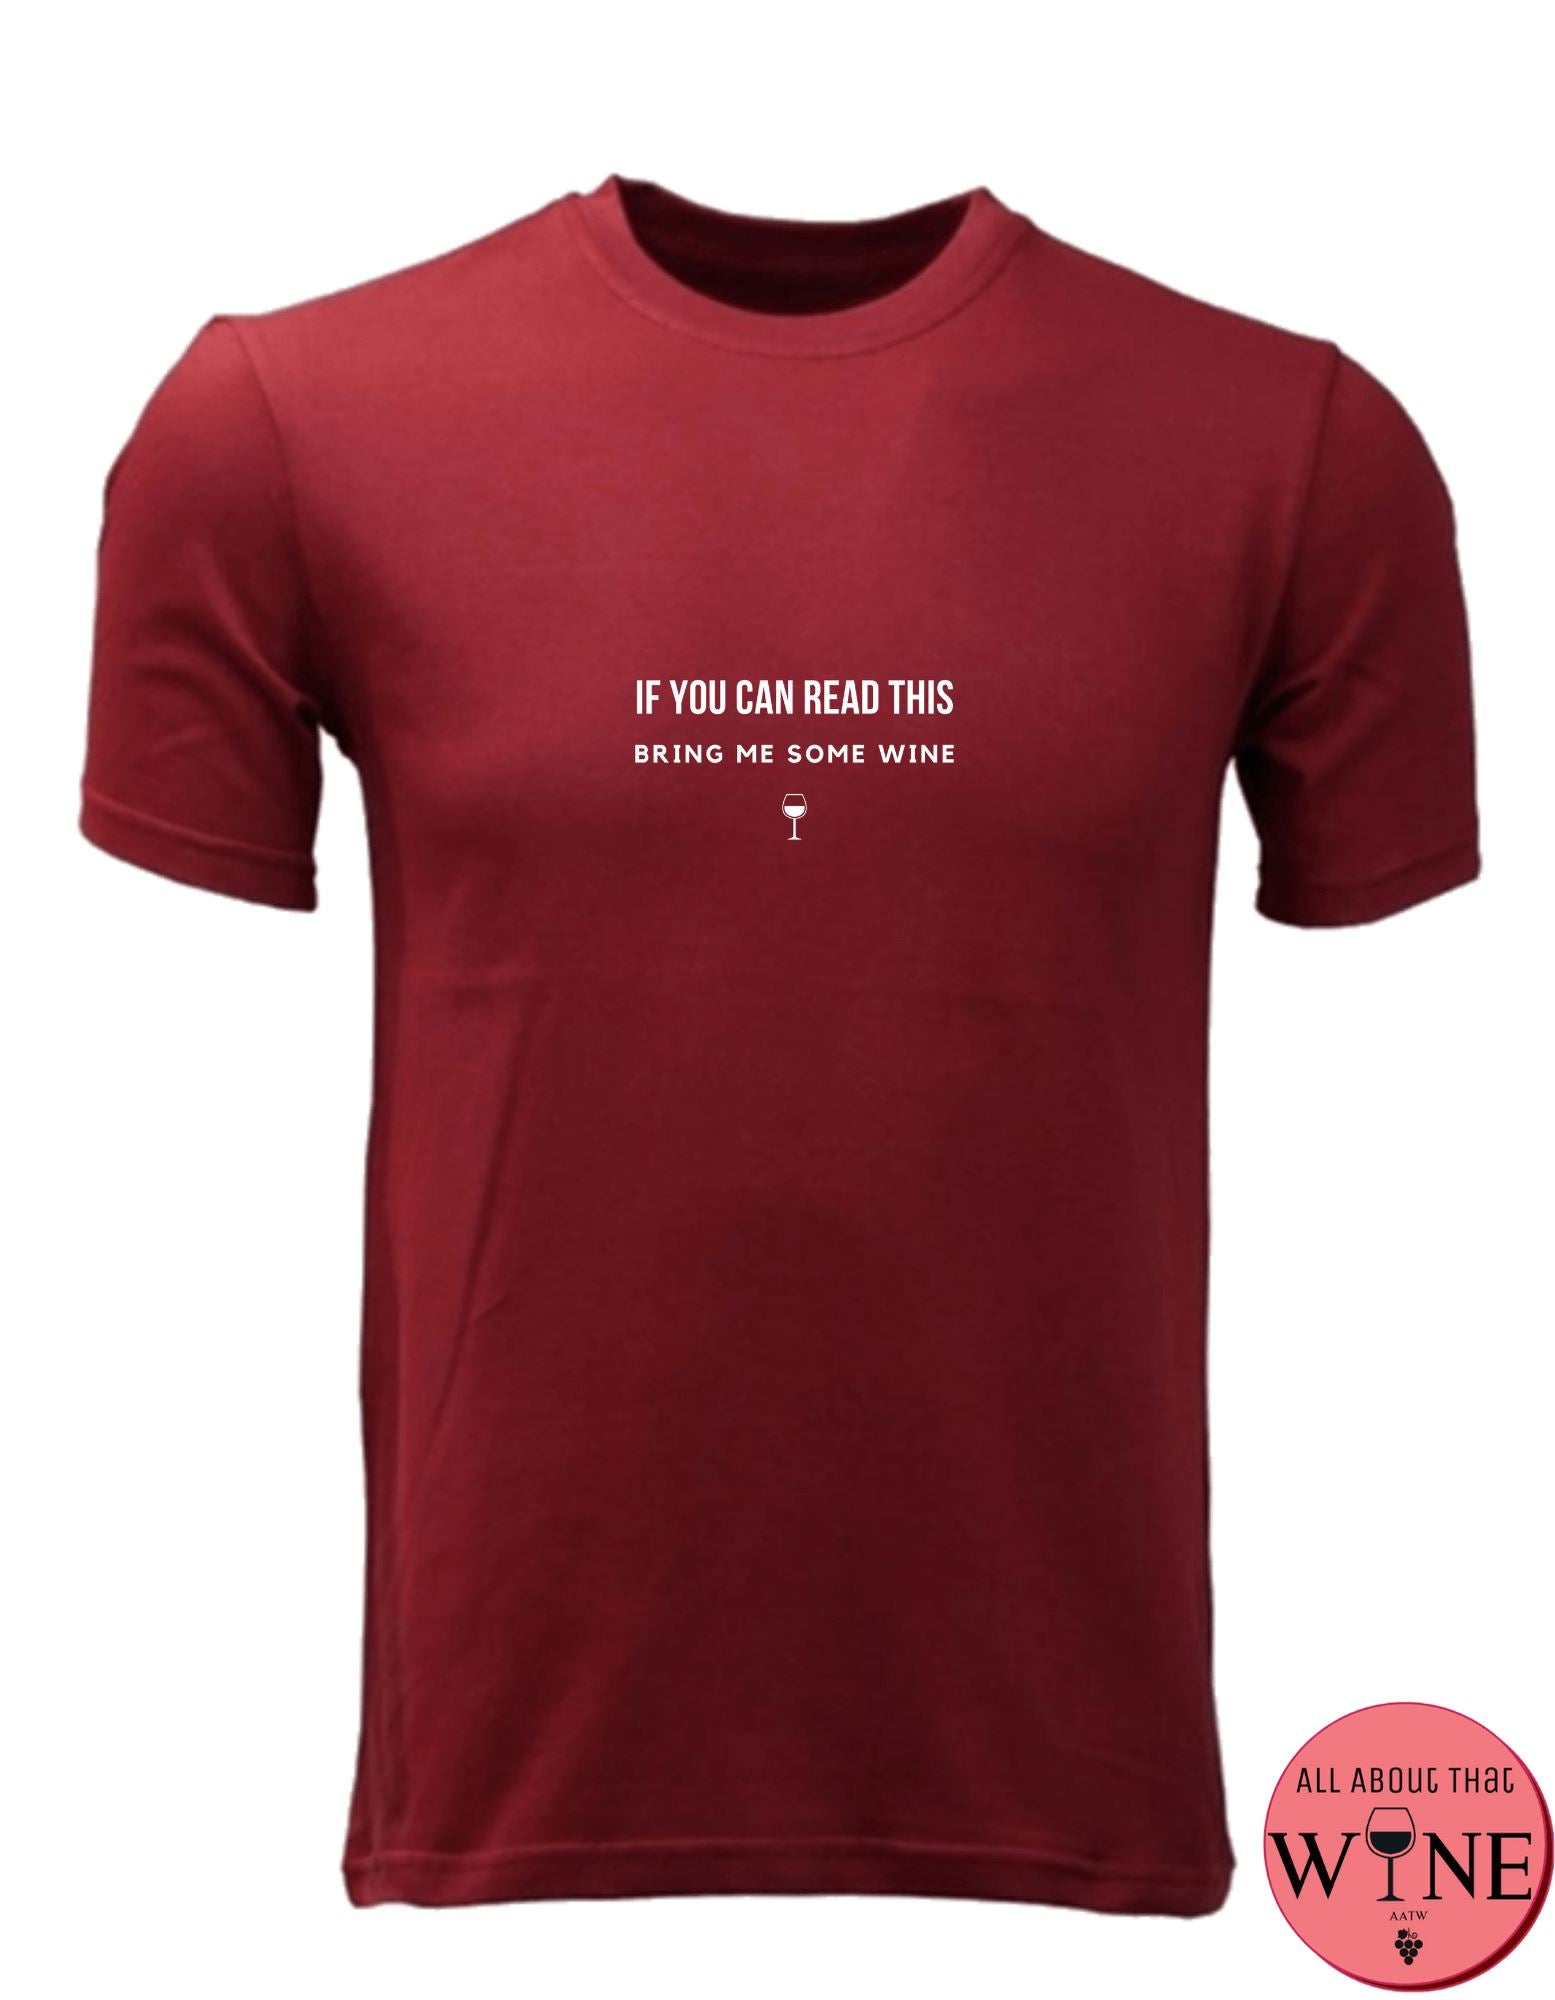 Bring Me Some Wine - Men's T-shirt S Deep red with white